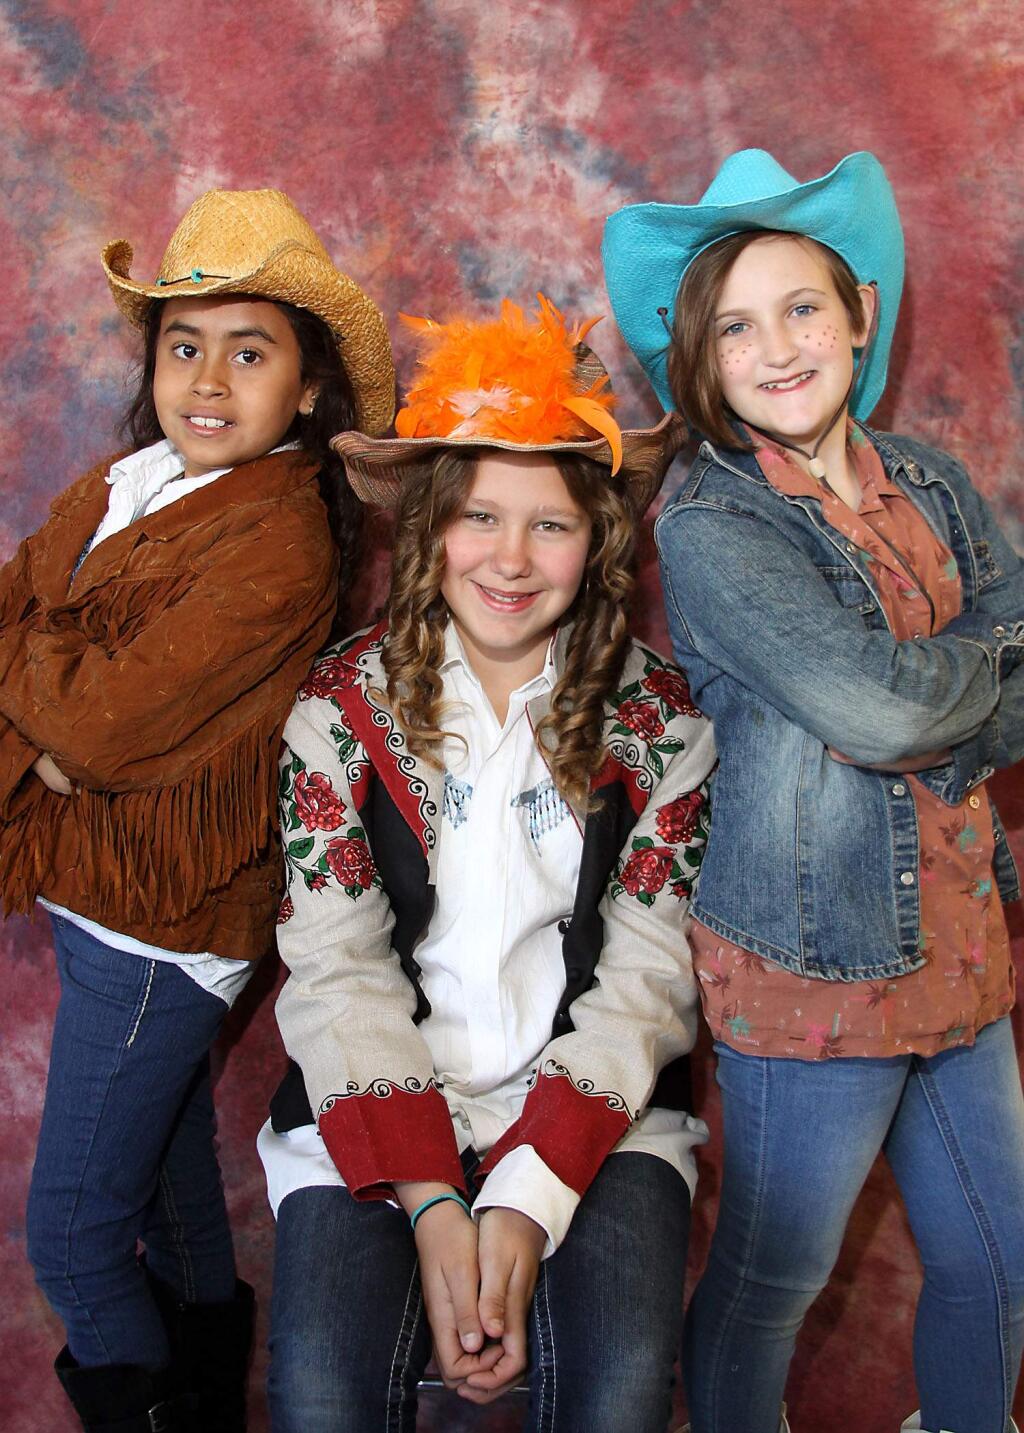 Dunbar Elementary fifth graders Escarly Vazquez as Big Bertha, Carlie Maxwell as Miss Abigail, and Grace Atkinson as Clemmie Clementine.